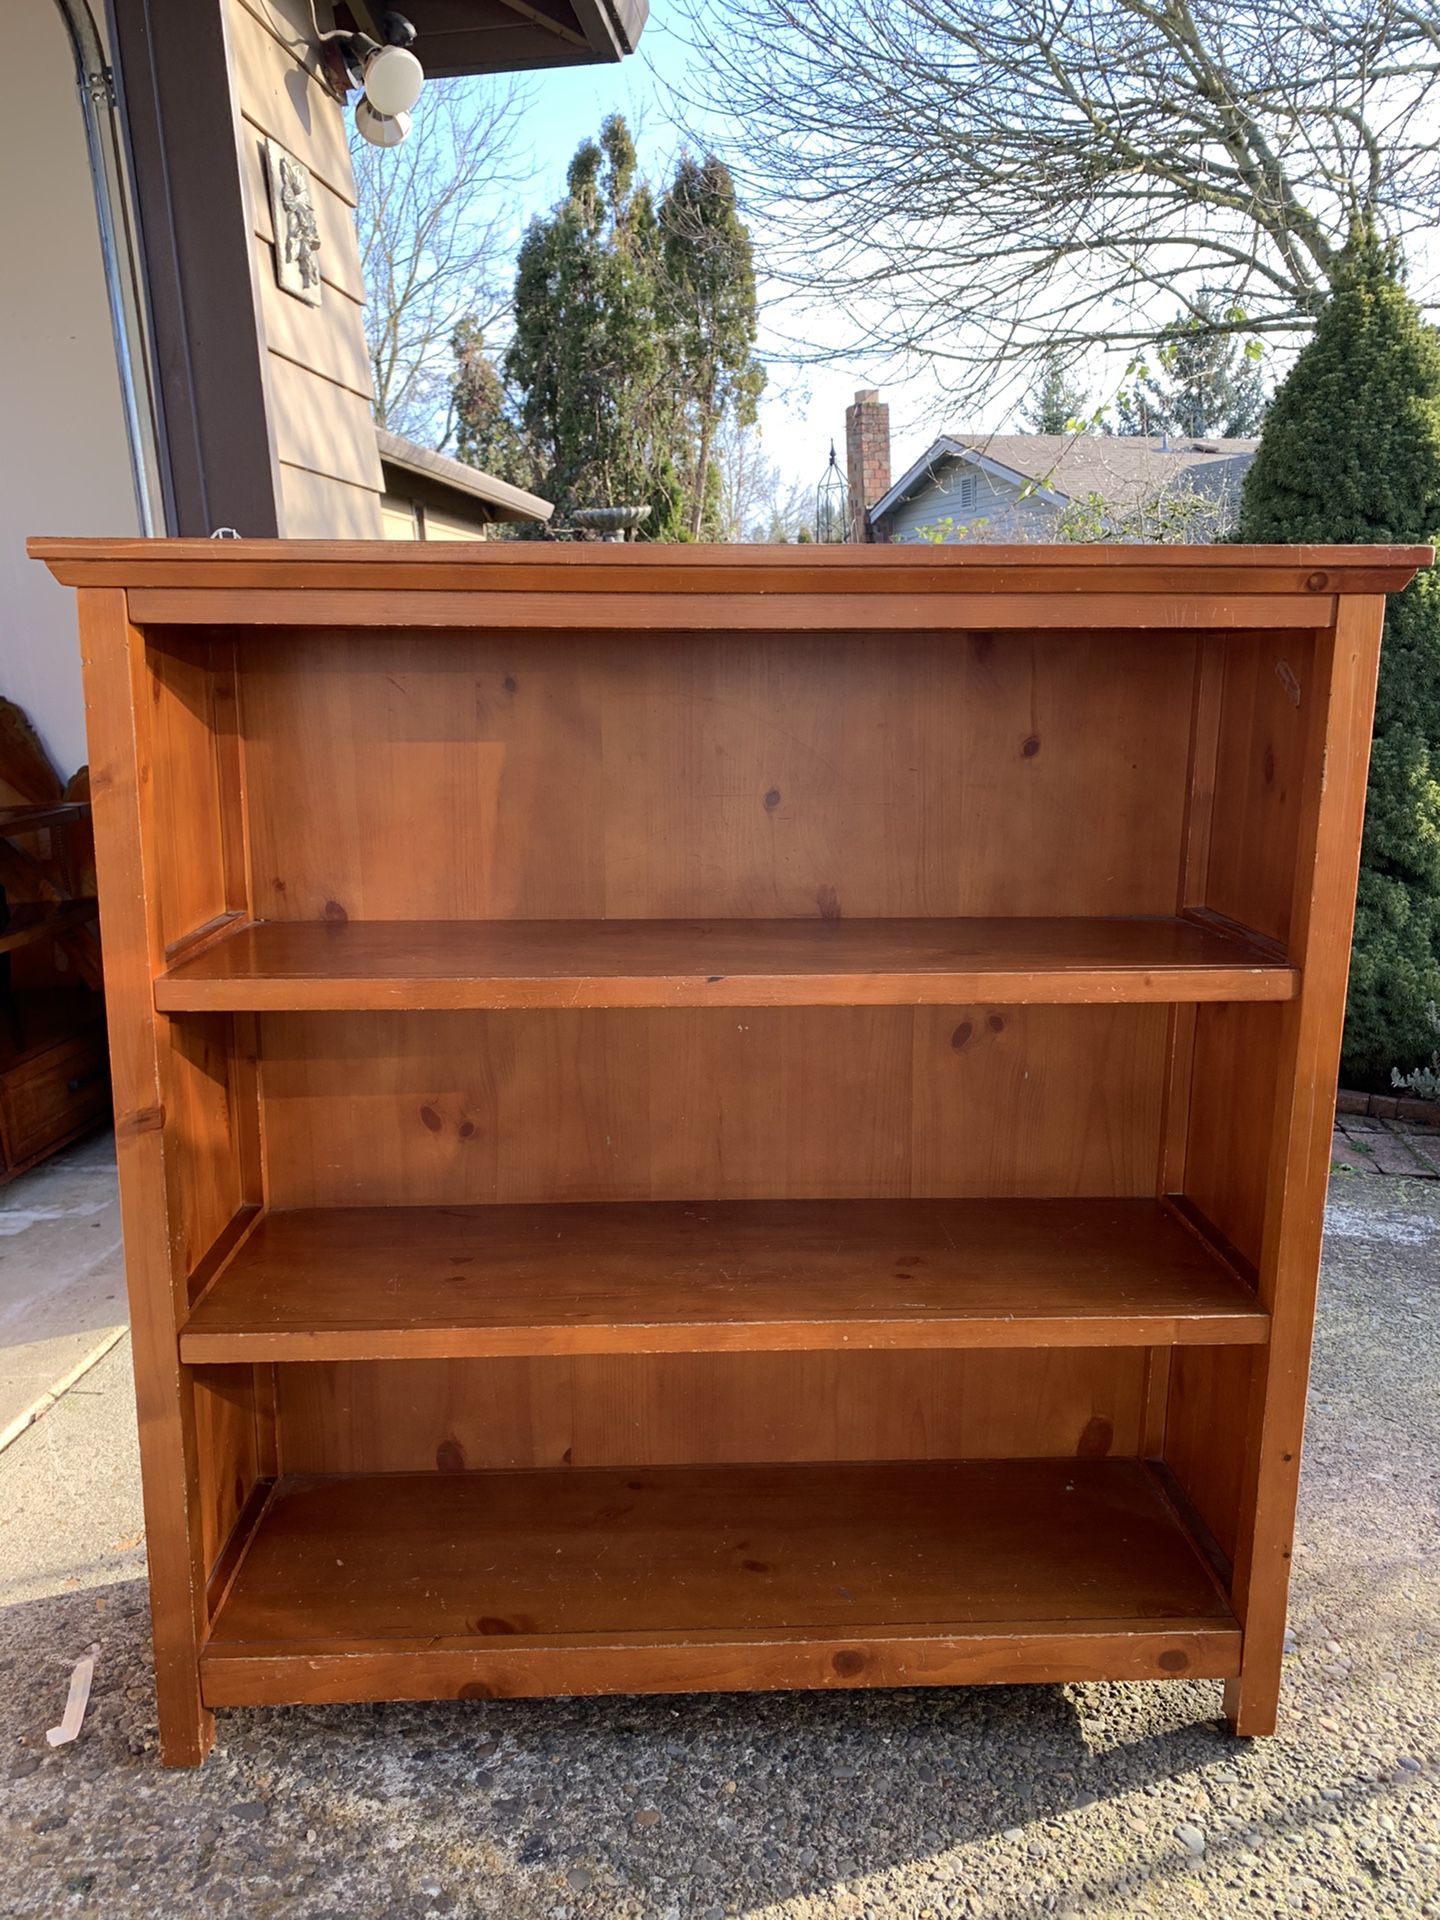 Solid wood bookcase